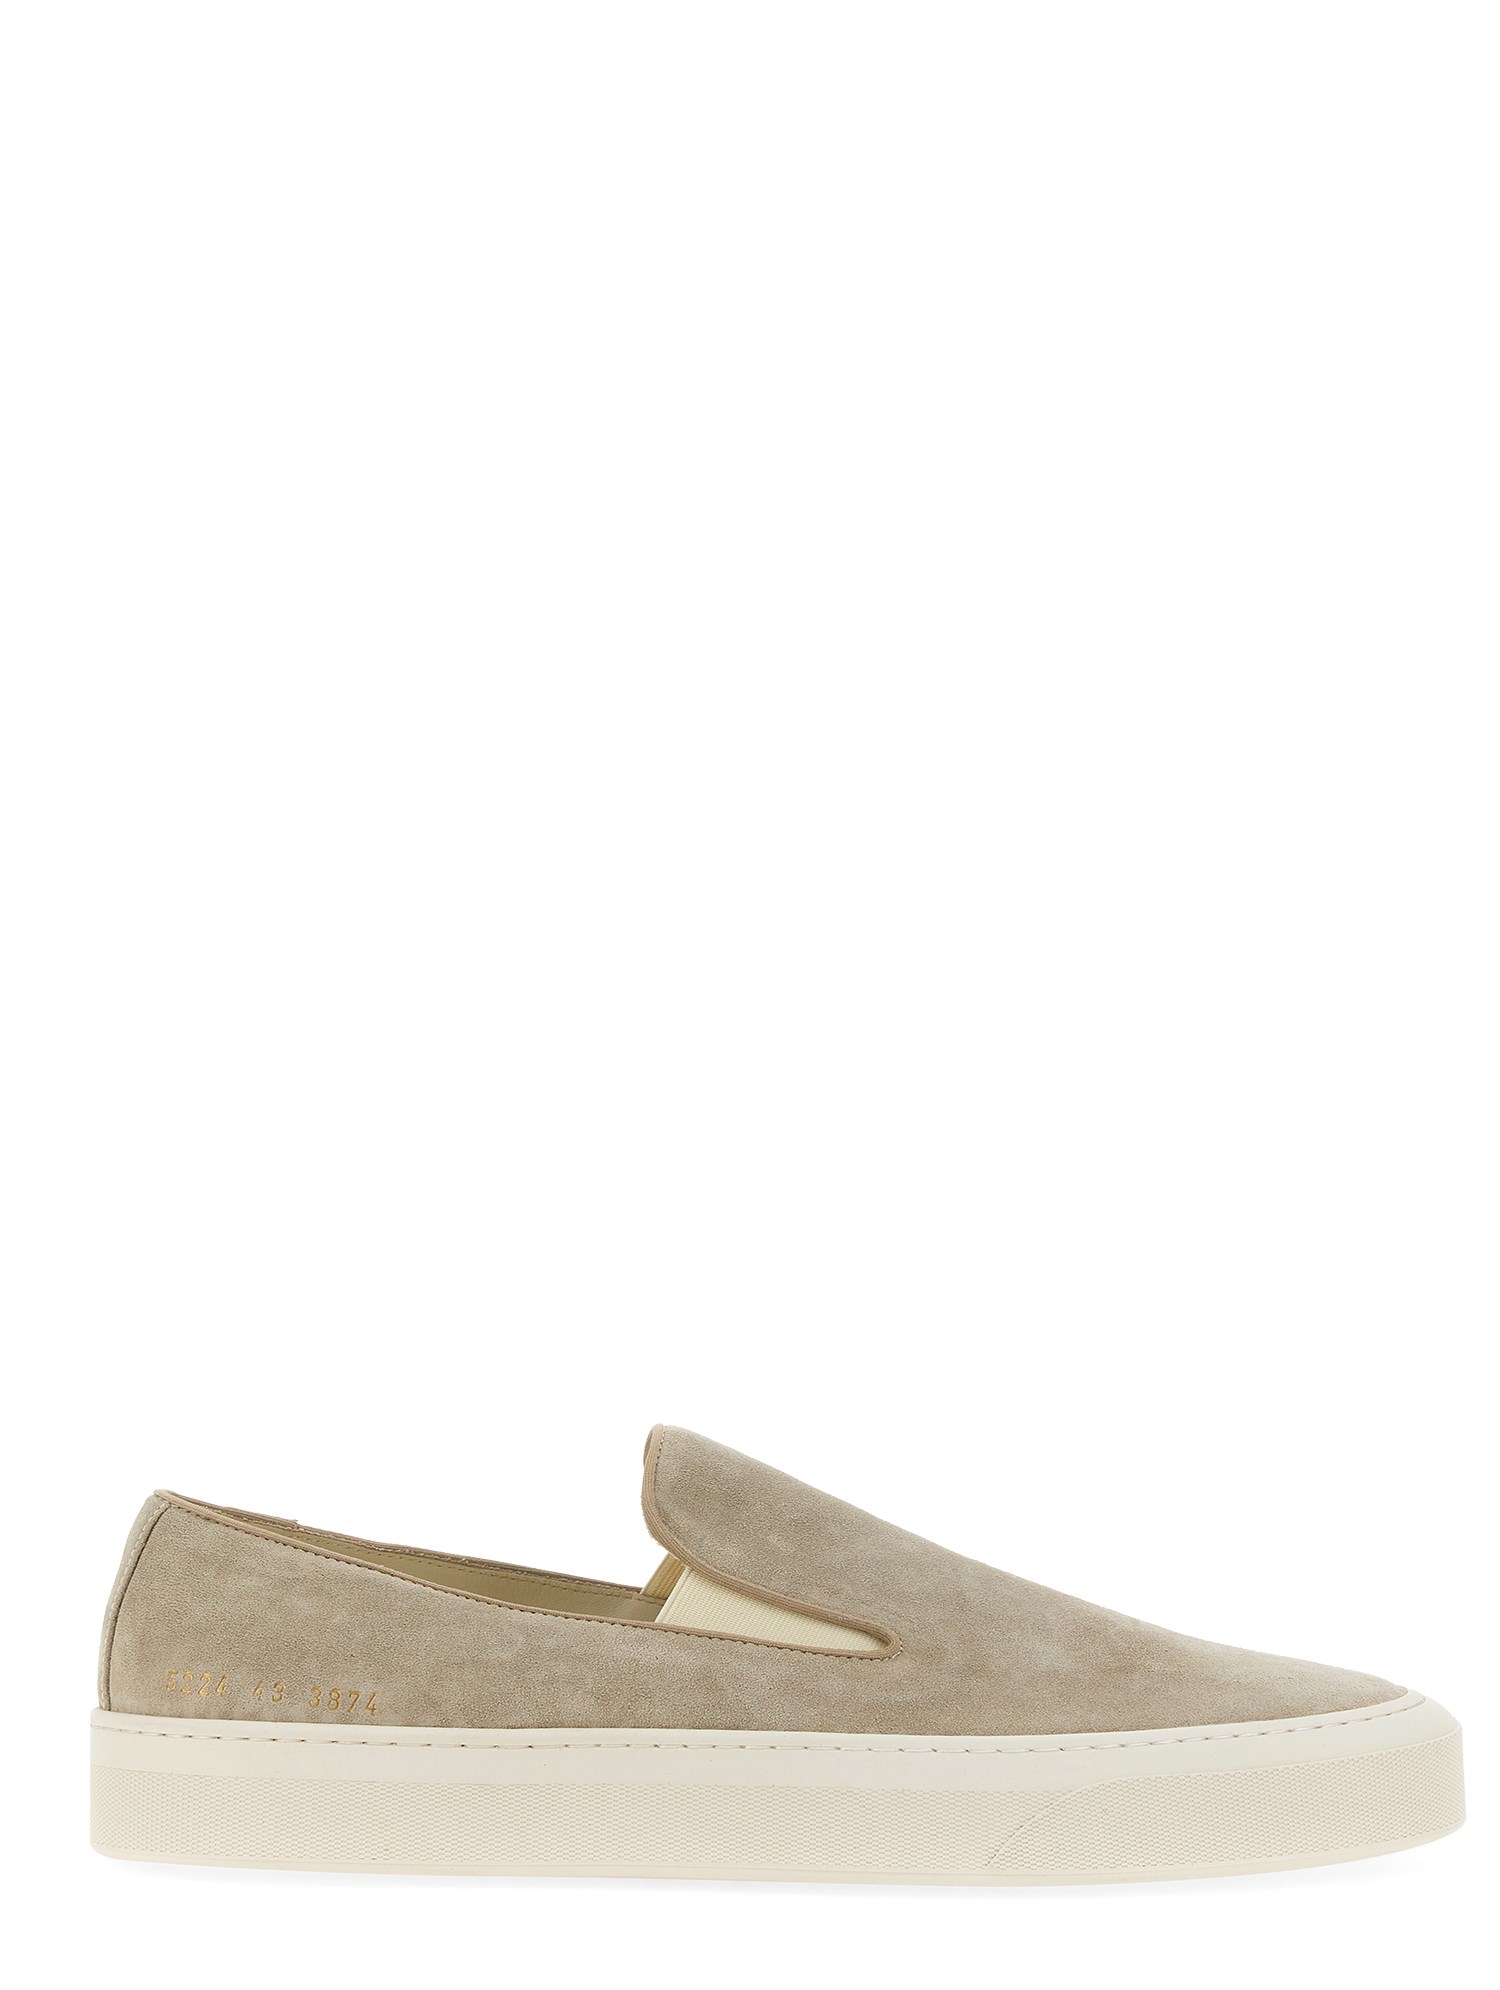 common projects suede slip-on sneaker